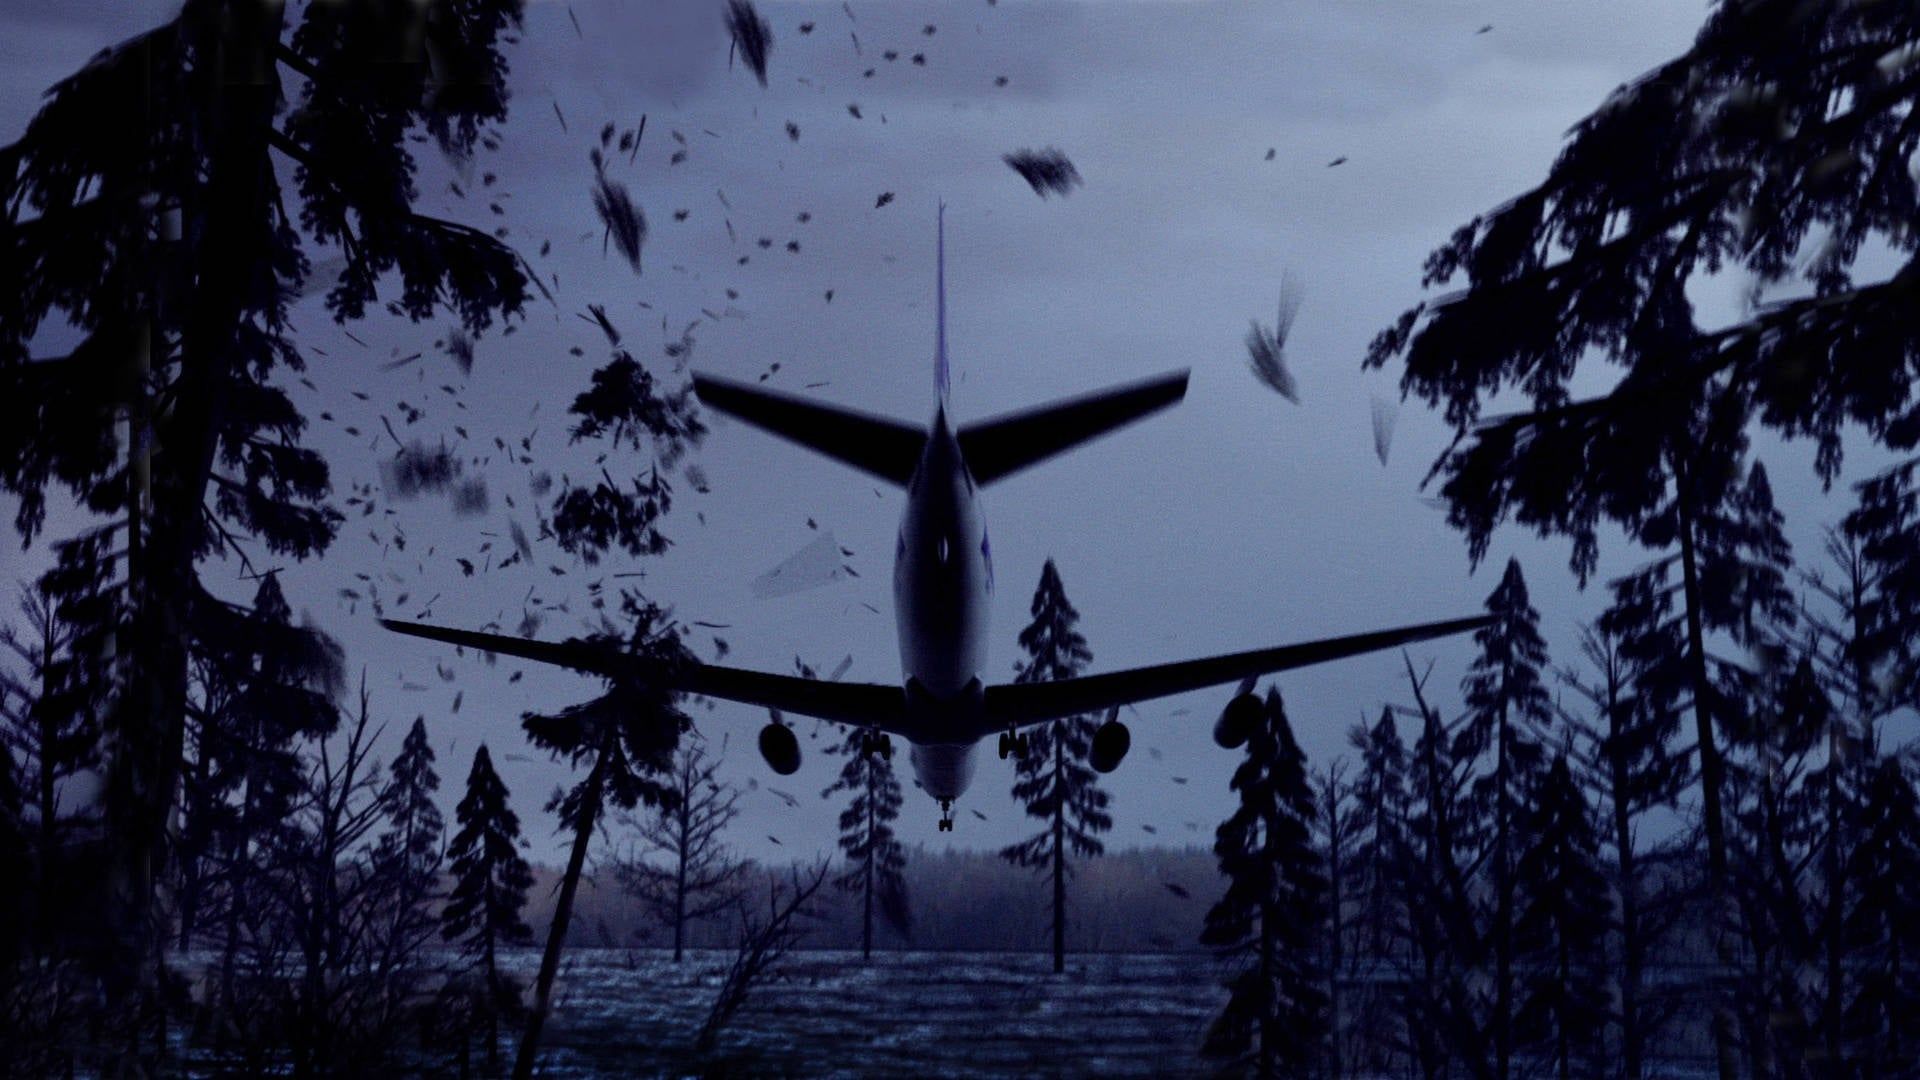 Air Disasters background